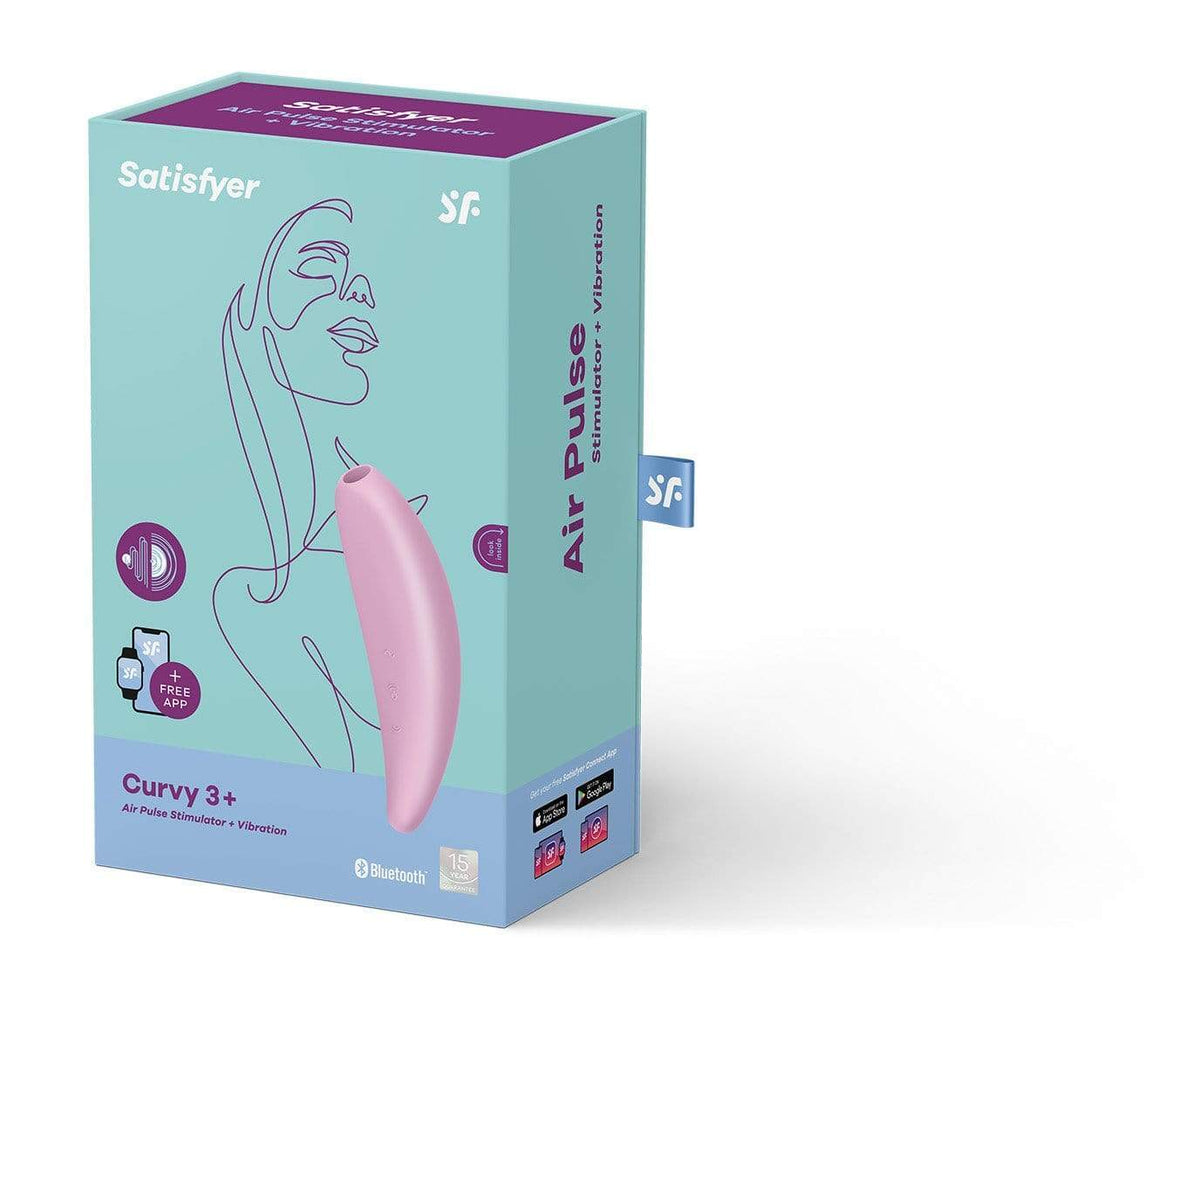 Satisfyer - Curvy 3+ App-Controlled Clitoral Air Stimulator Vibrator (Pink)    Clit Massager (Vibration) Rechargeable